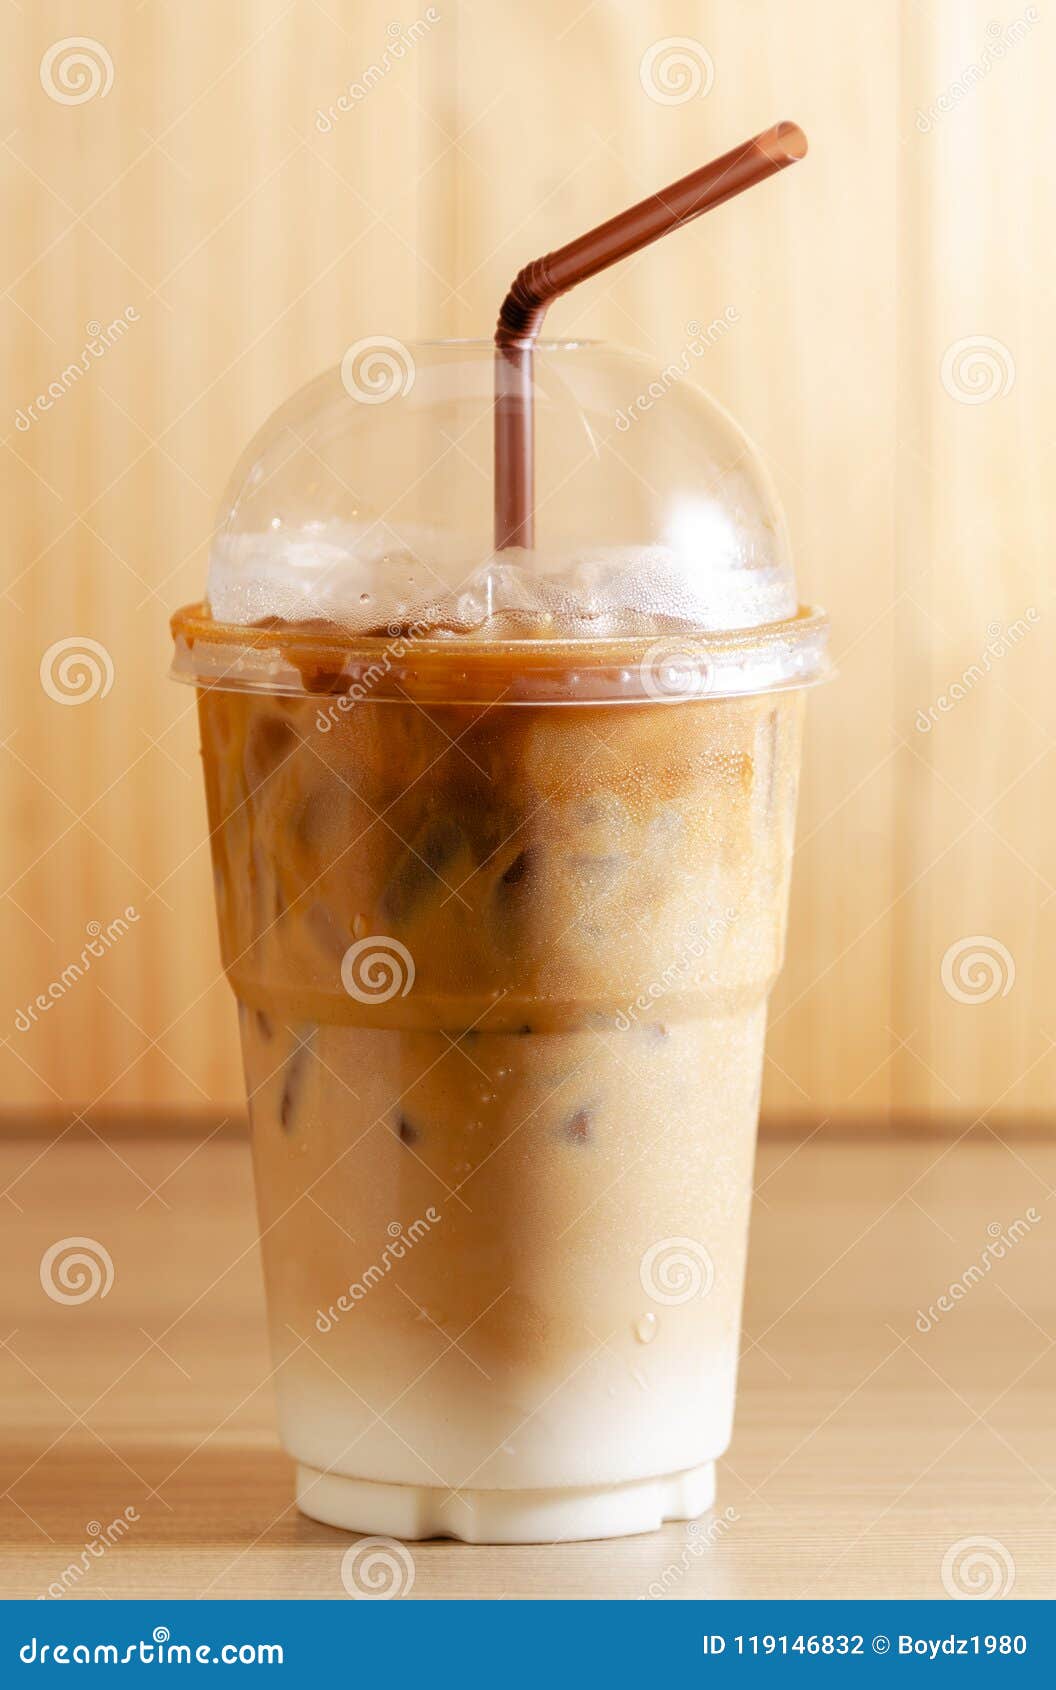 Iced coffee cup with straw stock photo. Image of frappe - 119146832